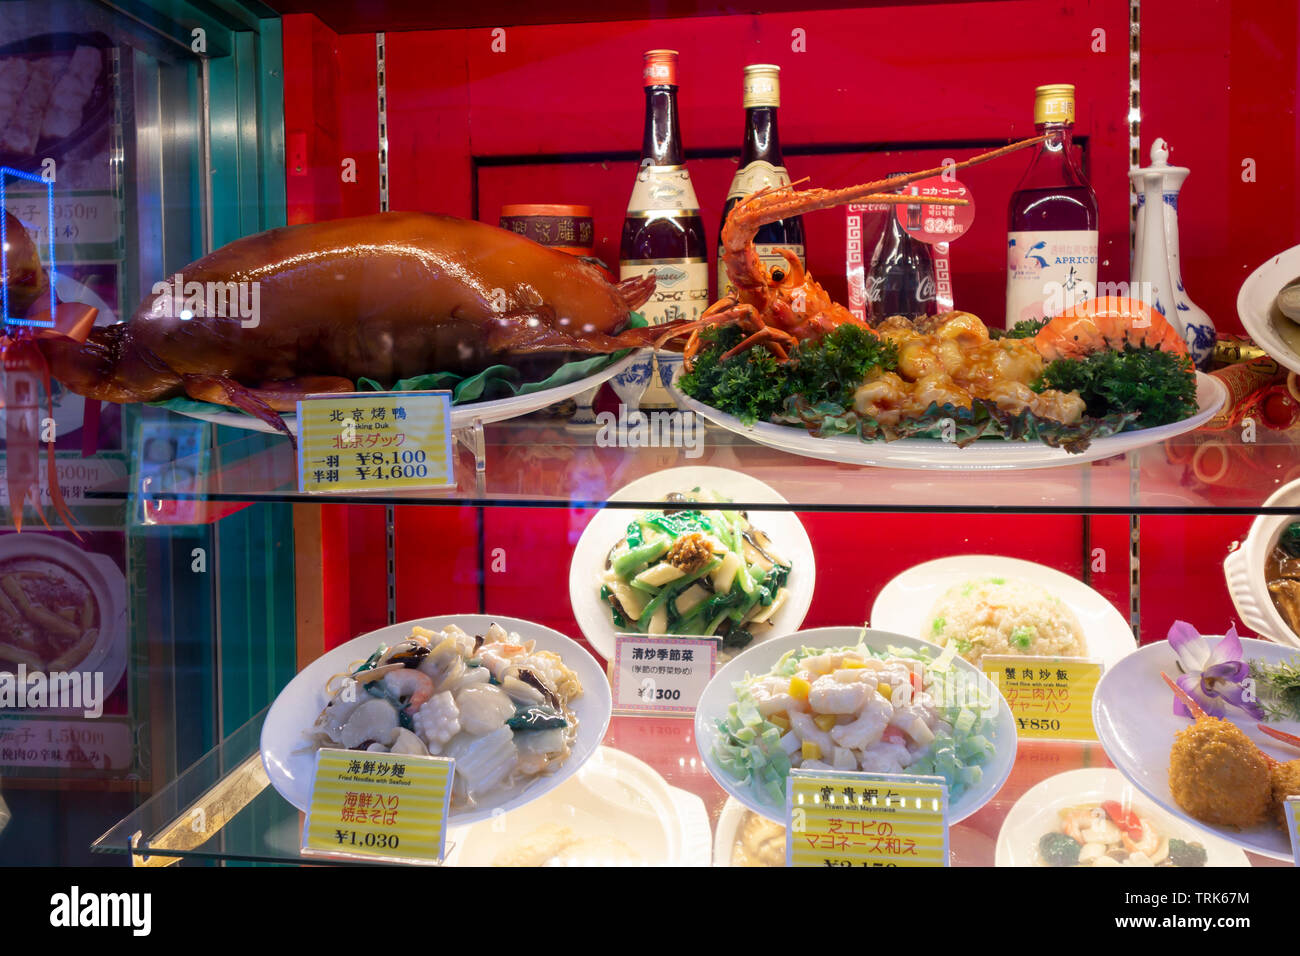 Fake plastic food on a restaurant display vitrine. Showing the food in a realistic way is typical in most Japanese res Stock Photo